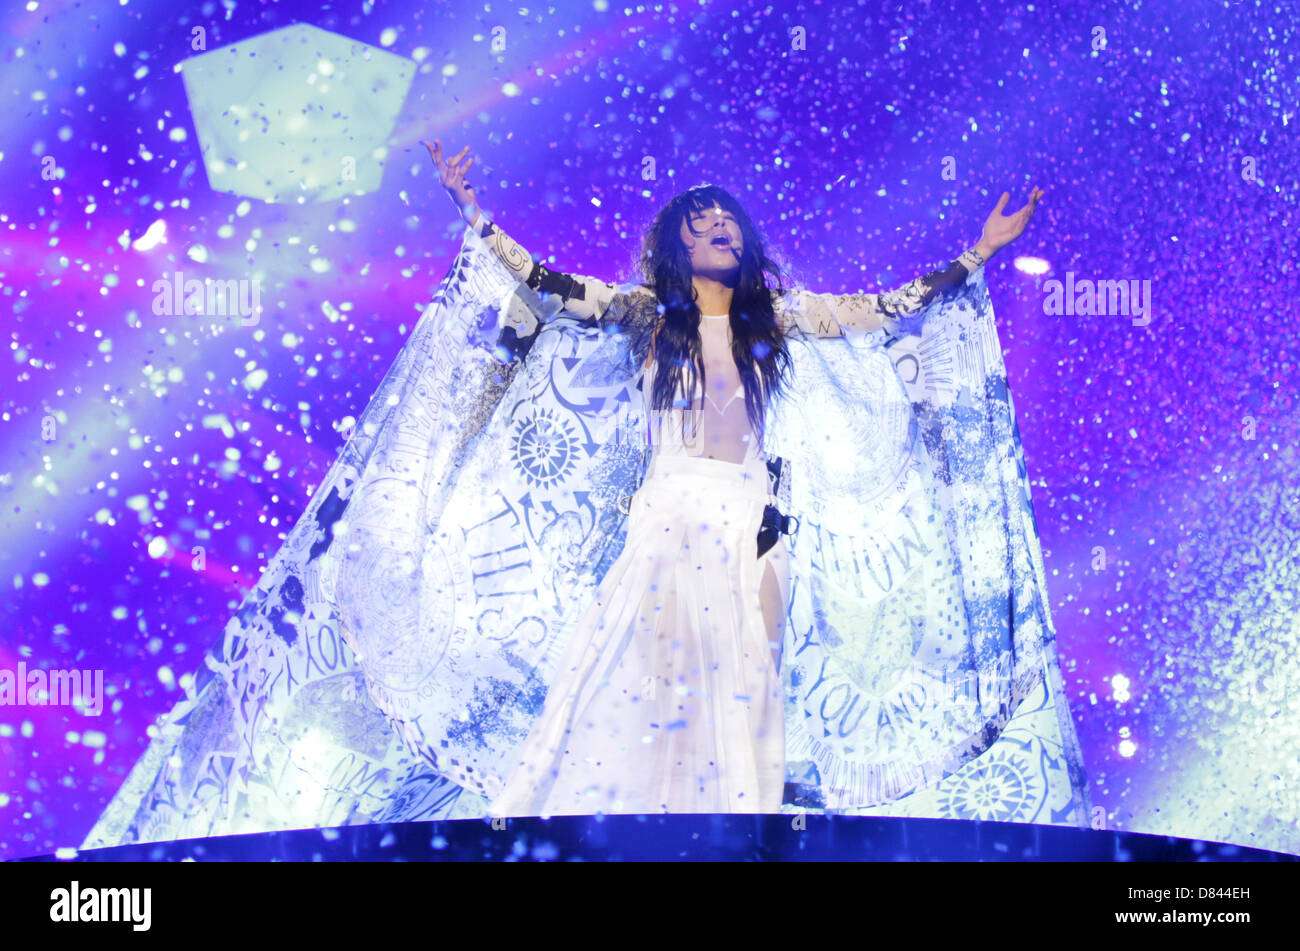 Swedish singer Loreen, winner of the ESC 2012, performing during the Grand Final of the Eurovision Song Contest 2013 in Malmo, Sweden, 18 May 2013. The annual event is watched by millions of television viewers who also take part in voting. Photo: Joerg Carstensen/dpa Stock Photo